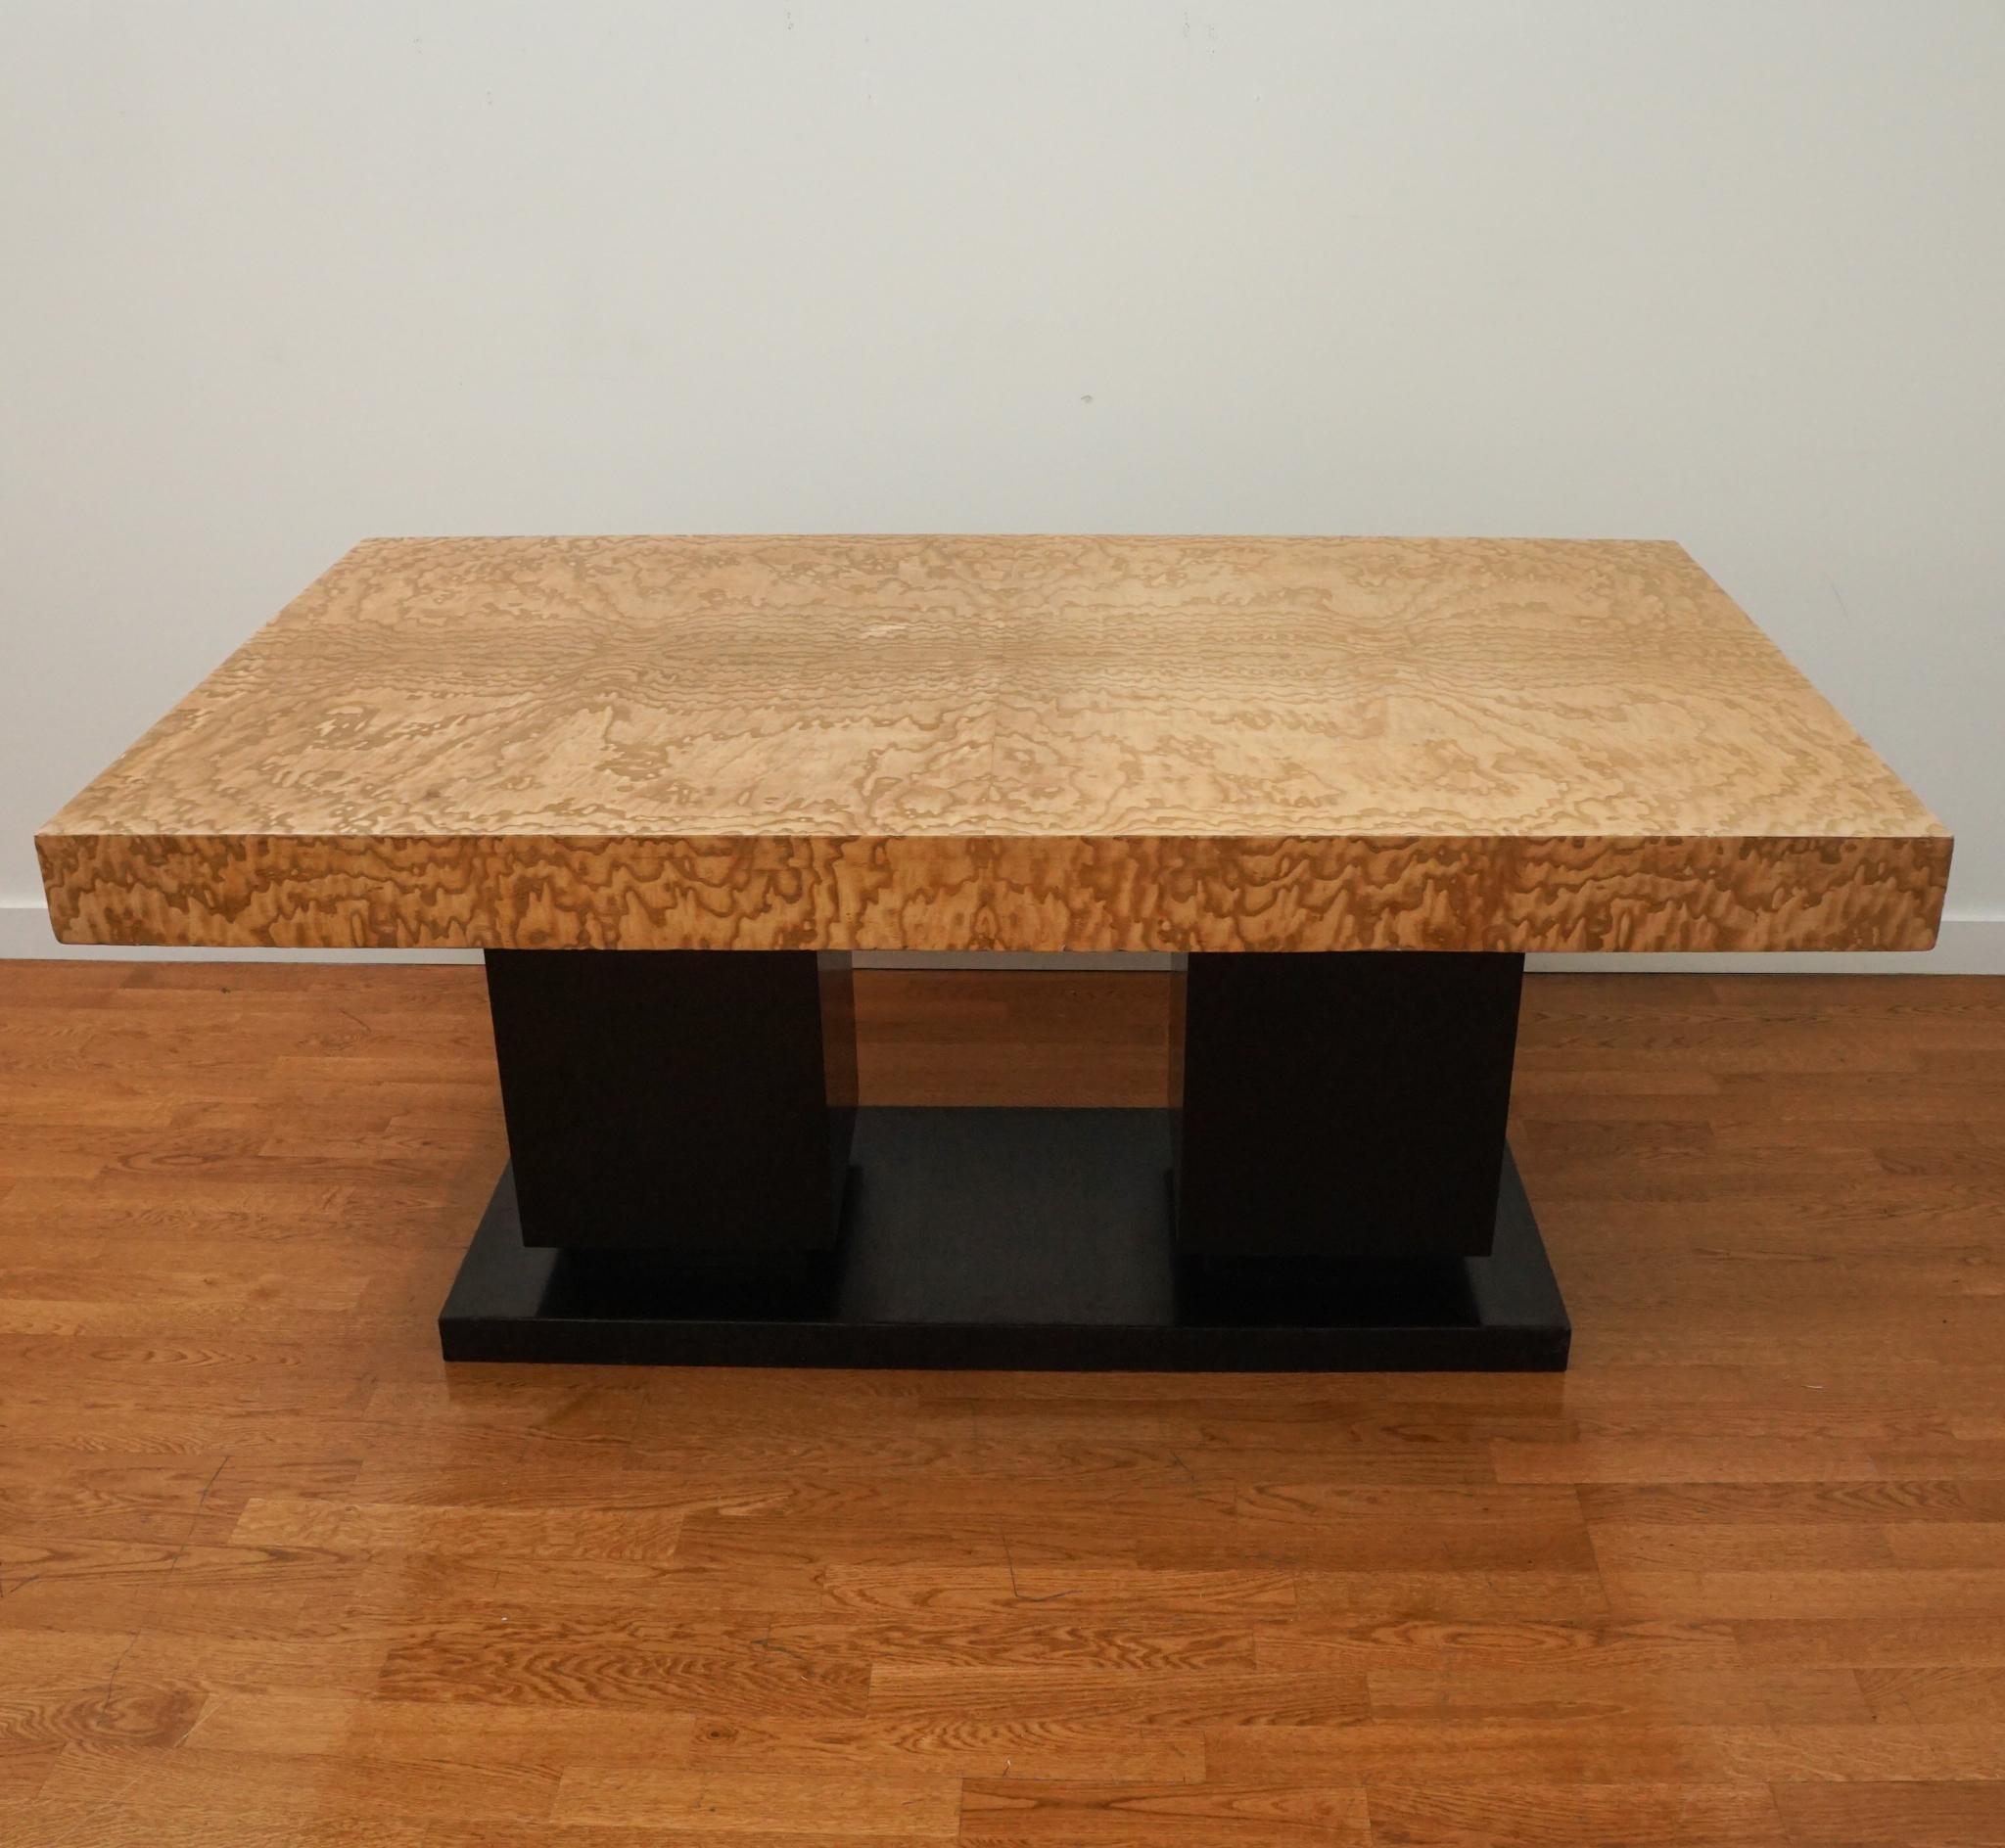 This exquisite Art Deco dining table is from France, circa 1930s and features an ash burl wood top supported with two square pedestal bases that sit on a raised rectangular base. The table has 28